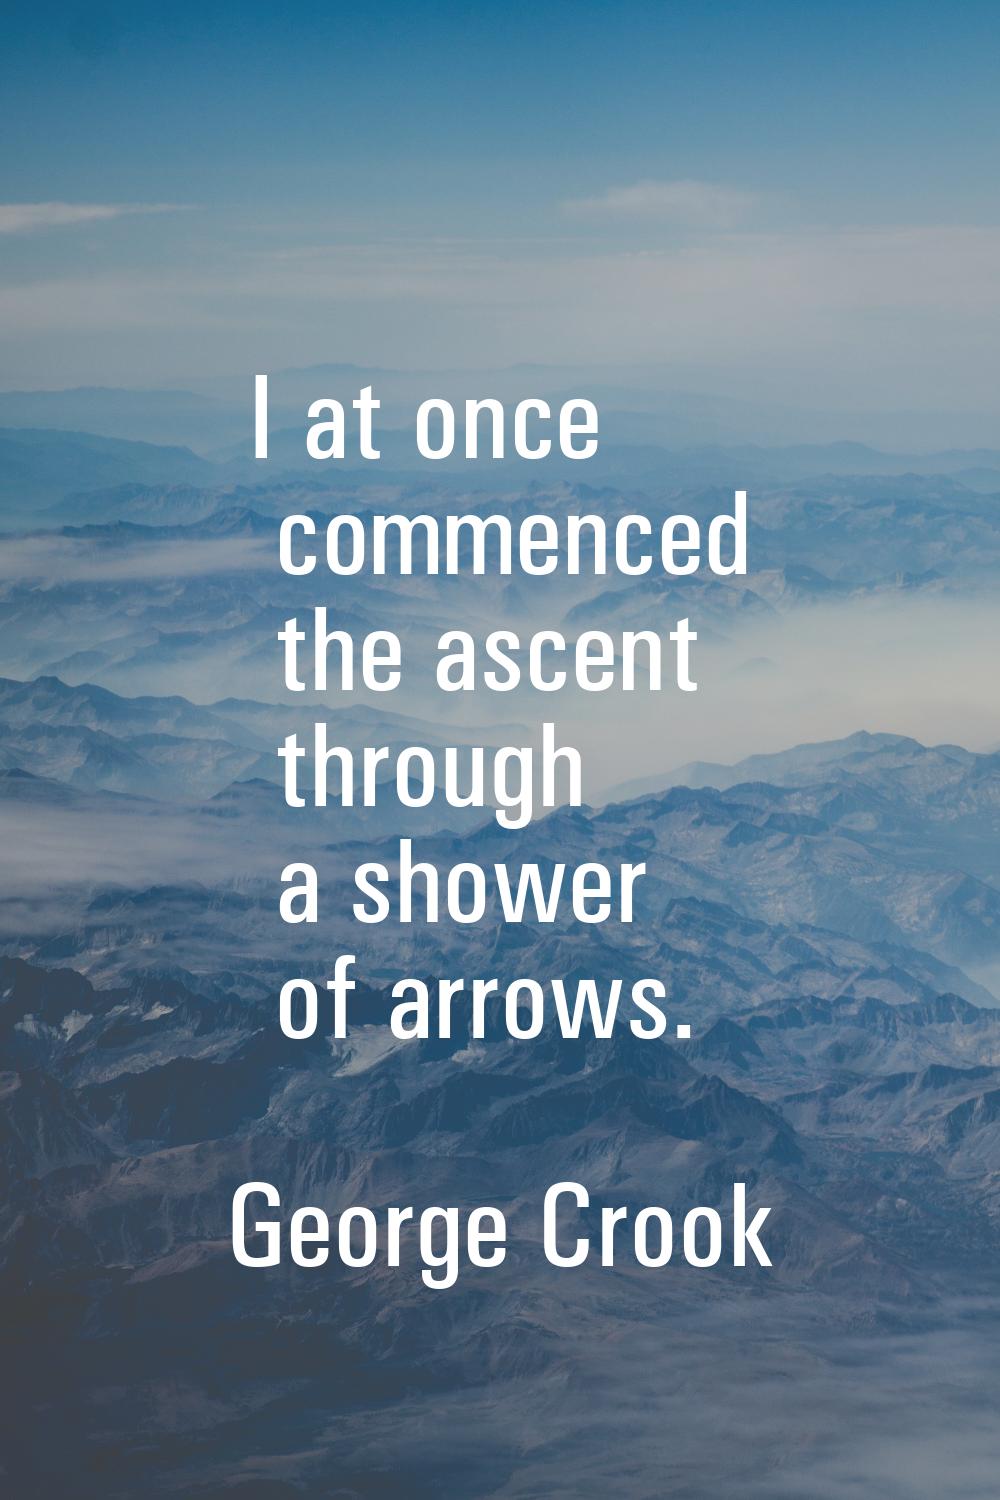 I at once commenced the ascent through a shower of arrows.